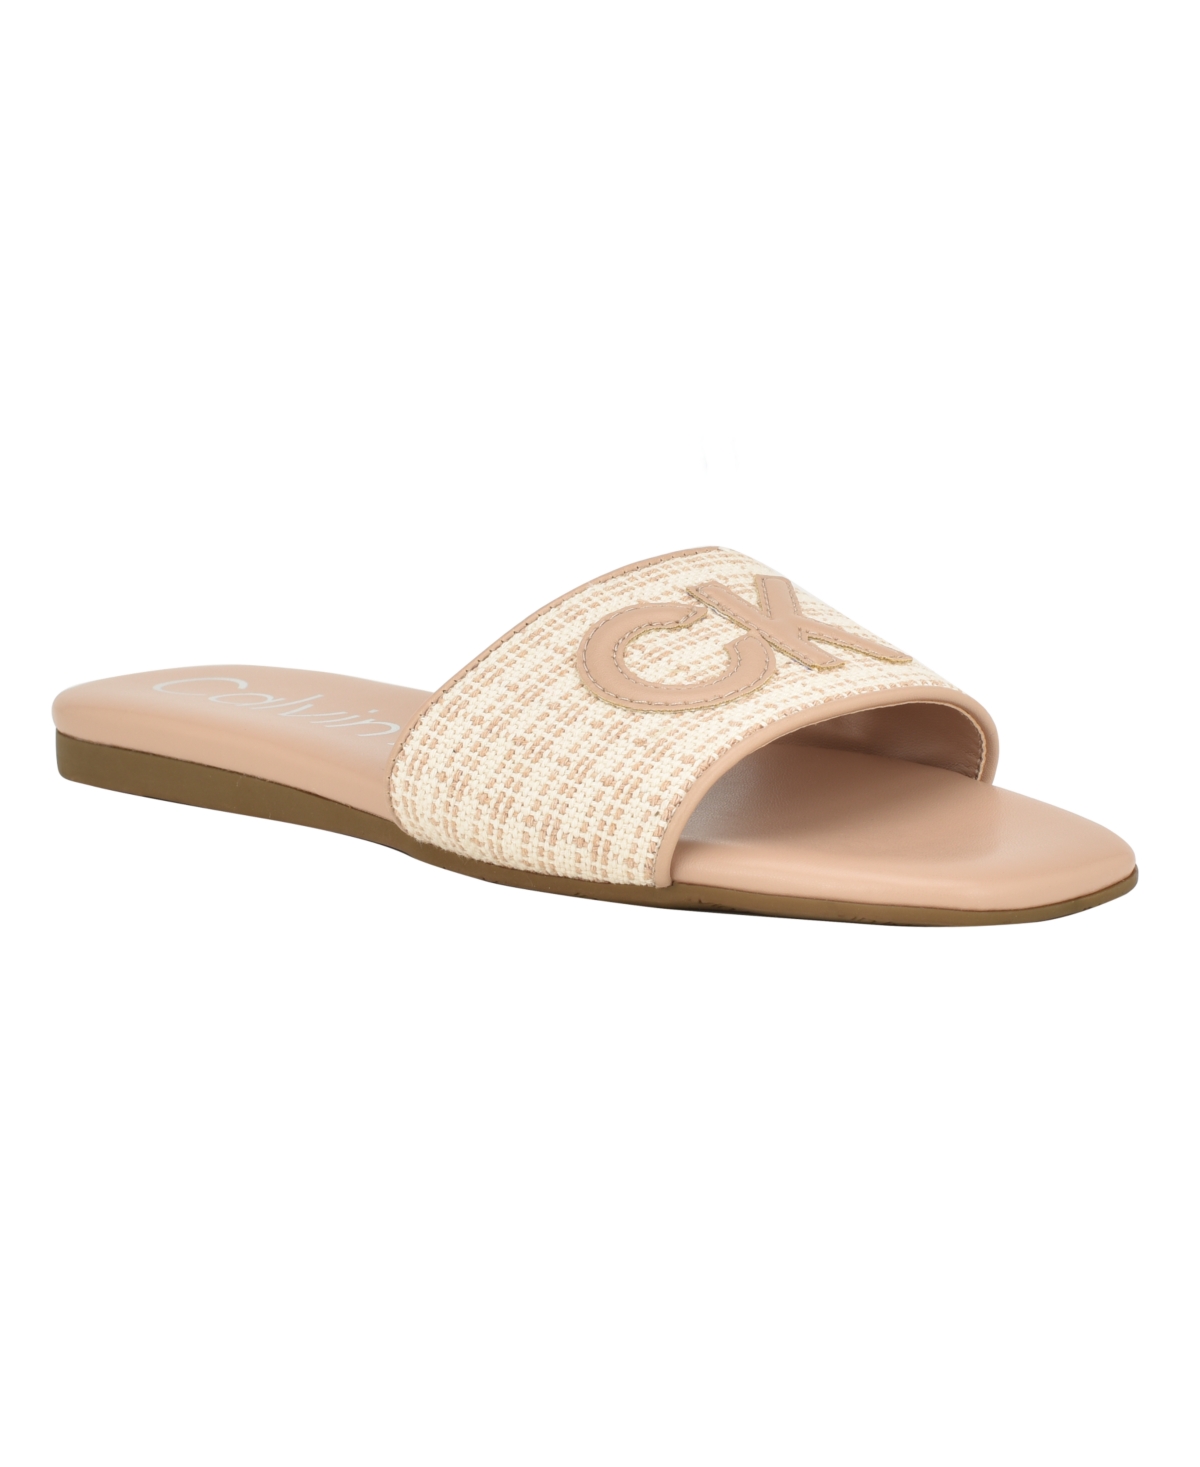 Shop Calvin Klein Women's Yides Slip-on Square Toe Flat Sandals In Light Natural